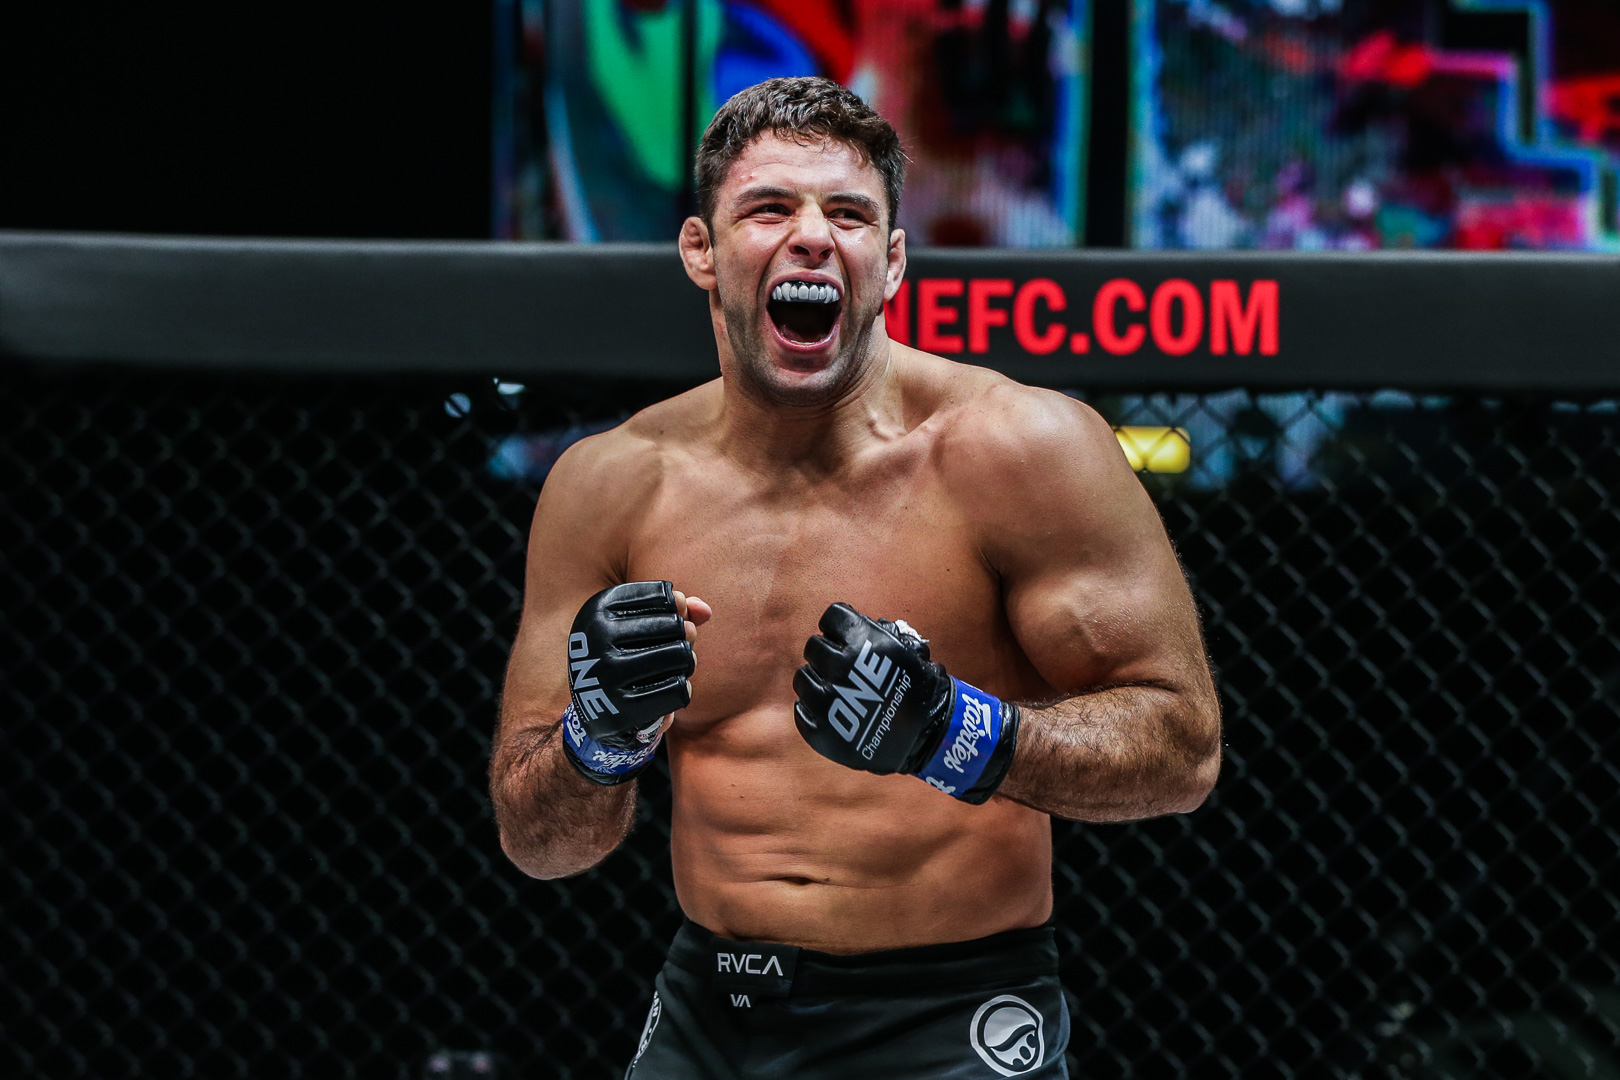 Buchecha was all smiles after his first-round submission victory at ONE: WINTER WARRIORS.